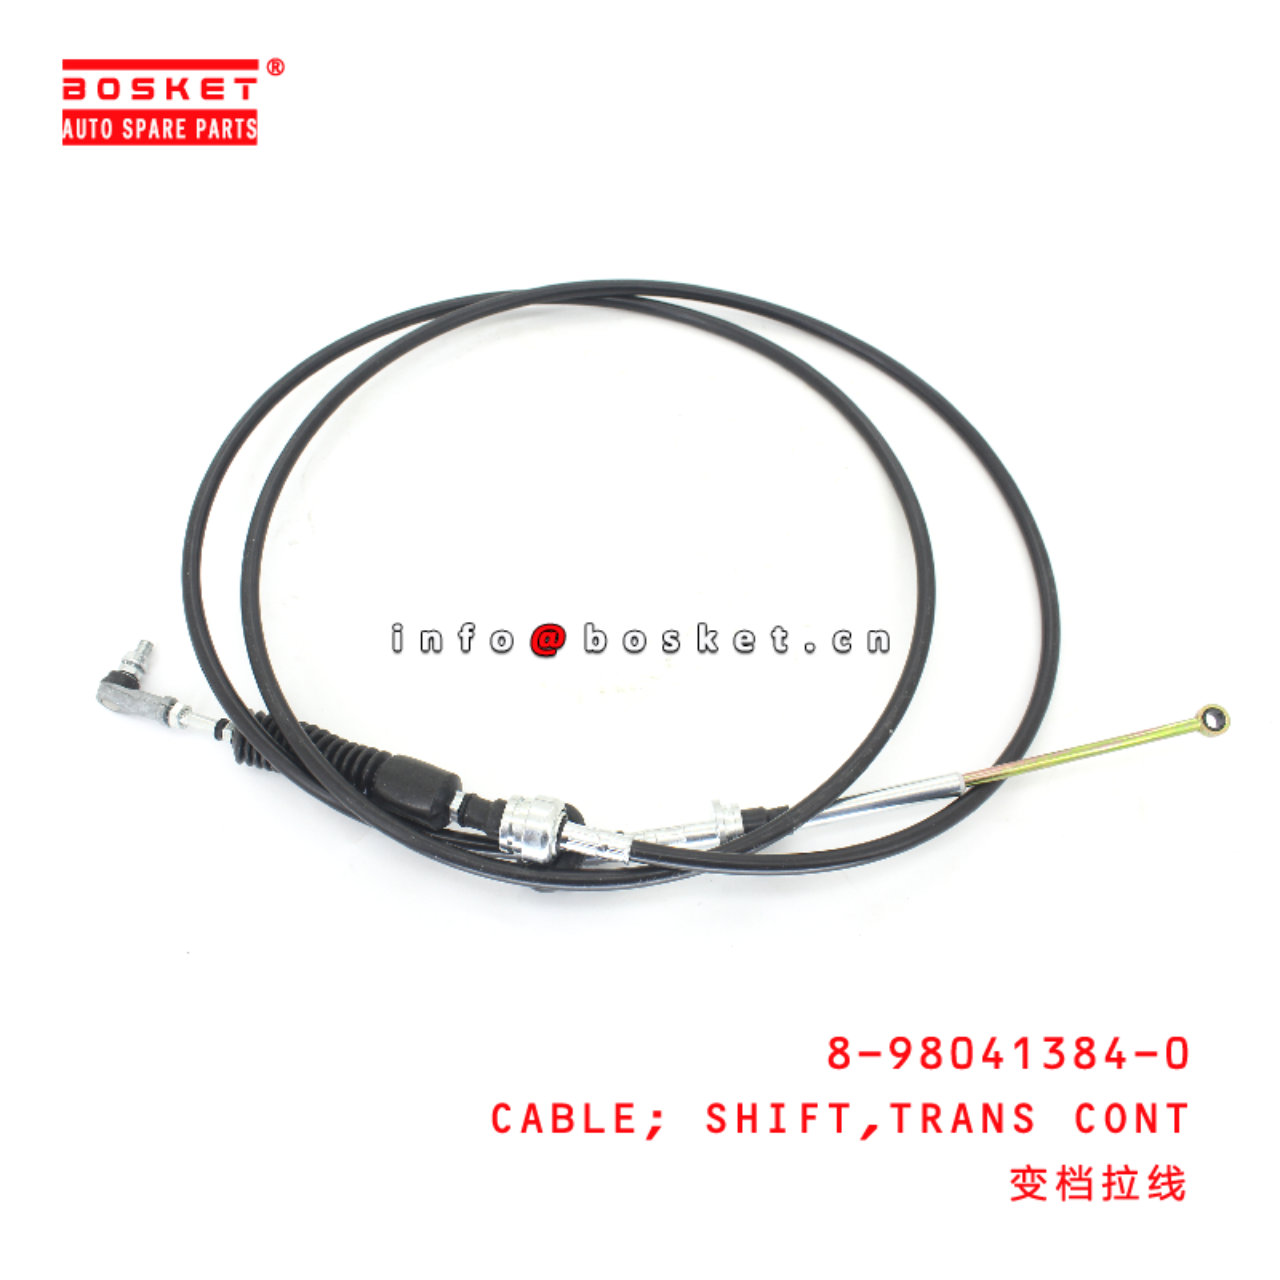 8-98041384-0 TRANSMISSION CONTROL SHIFT CABLE suitable for ISUZU   8980413840